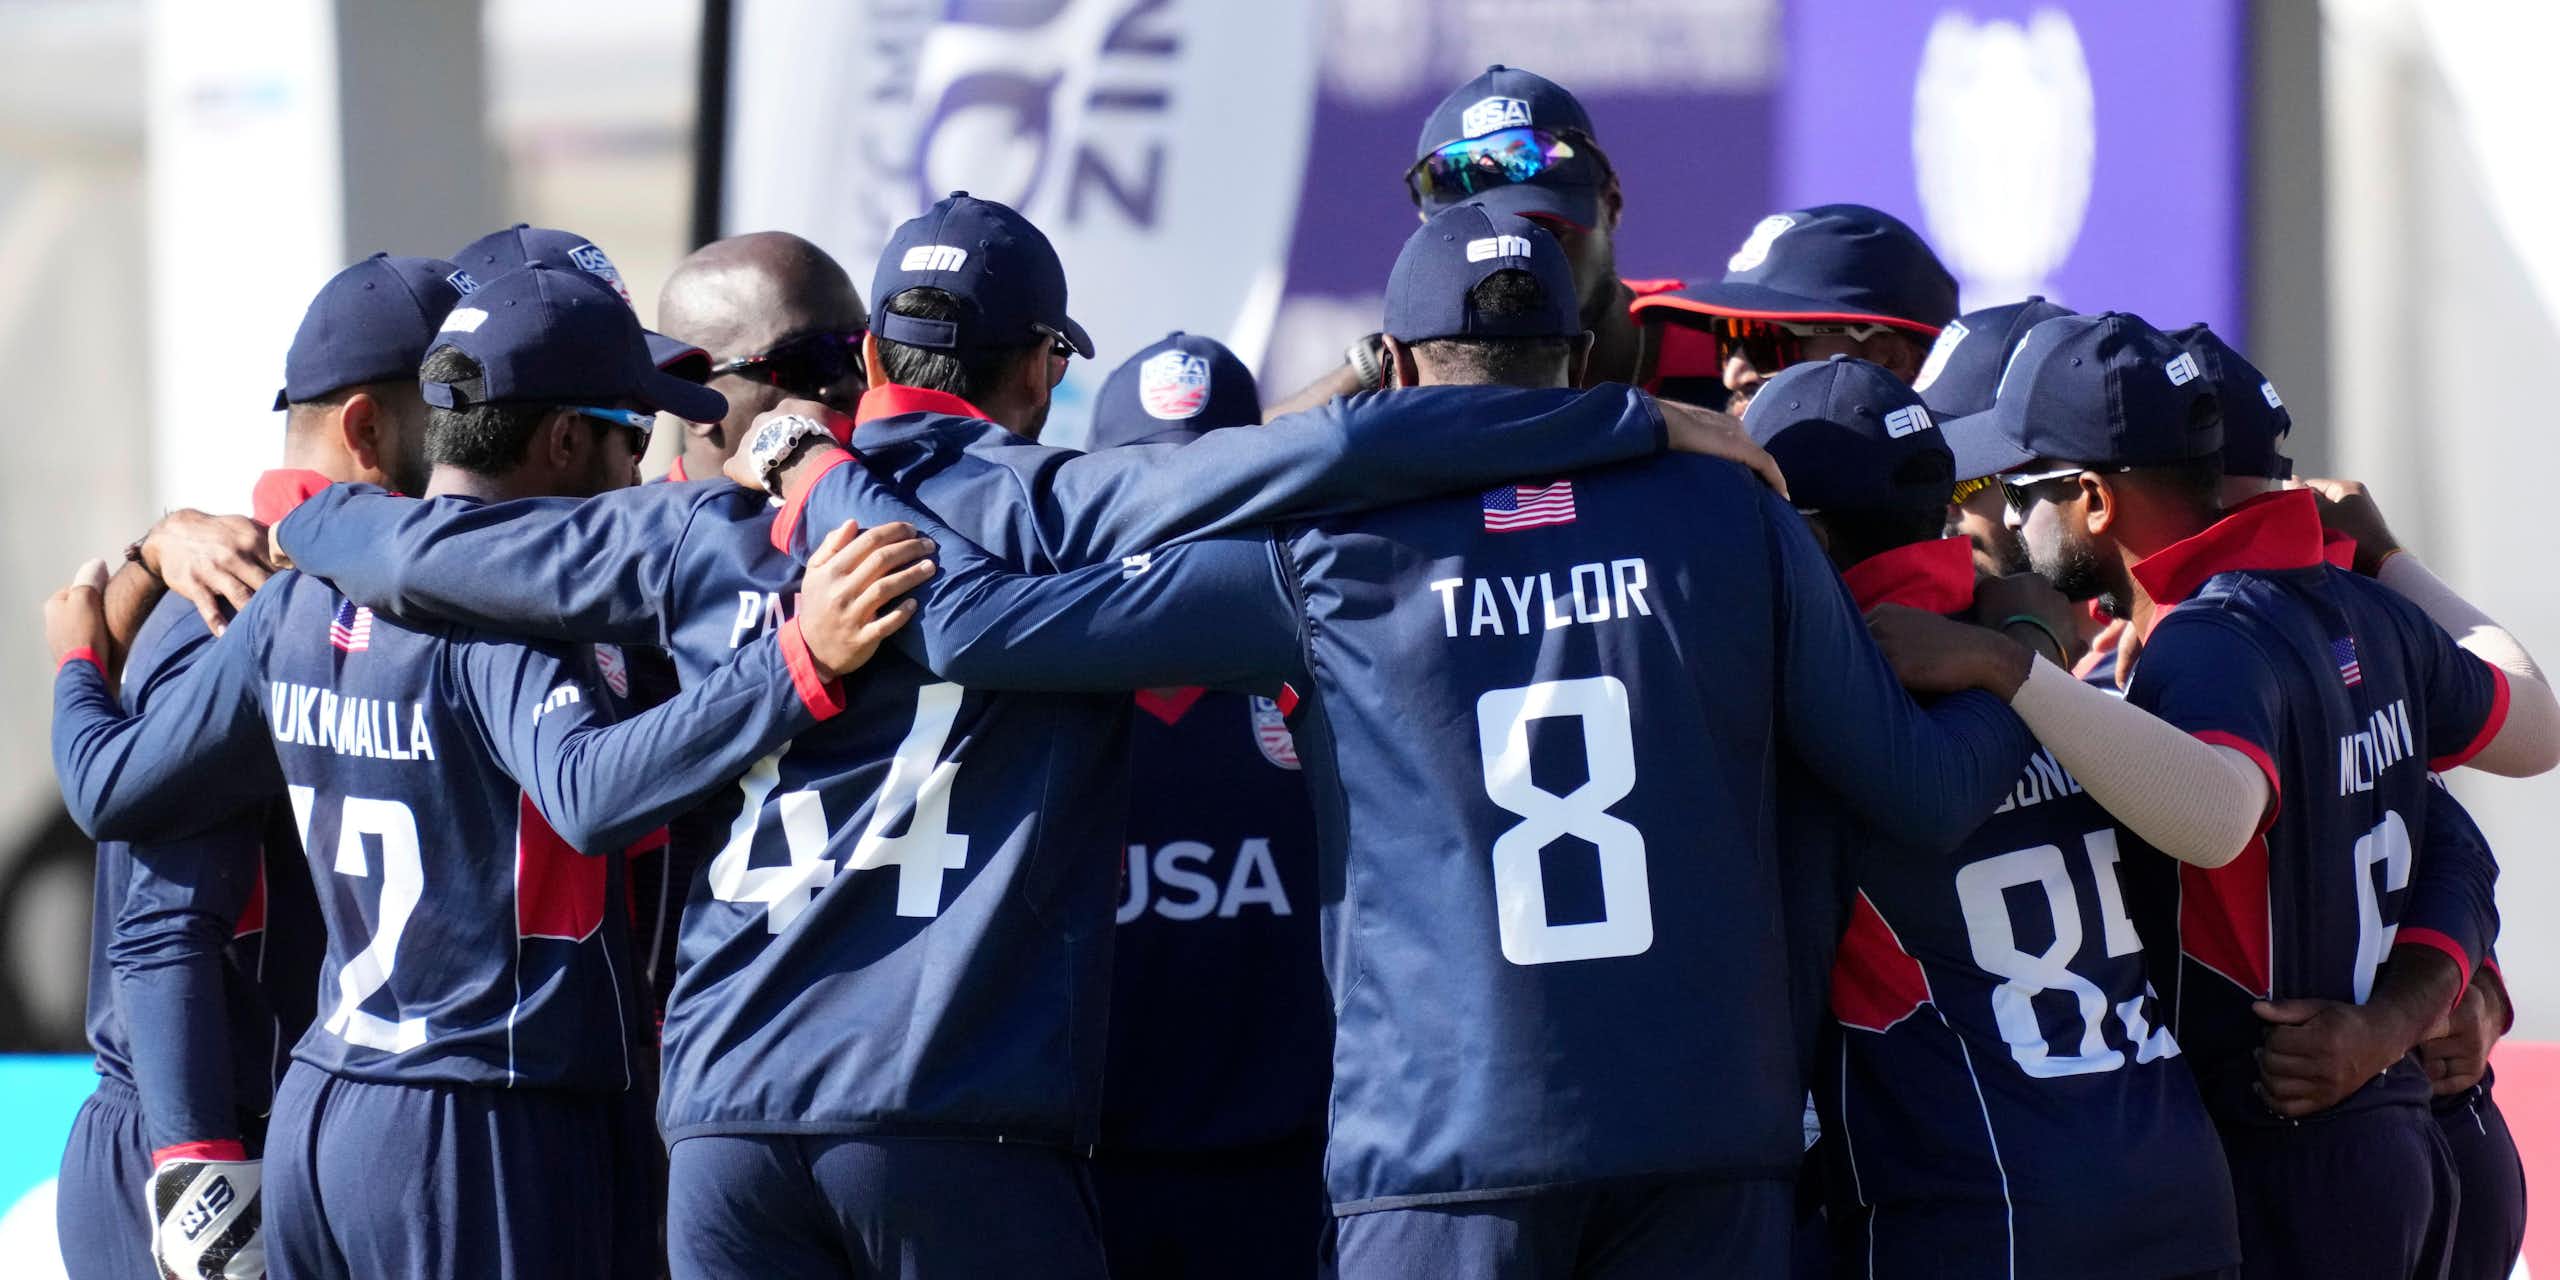 The men's USA cricket team gathered together in a huddle.